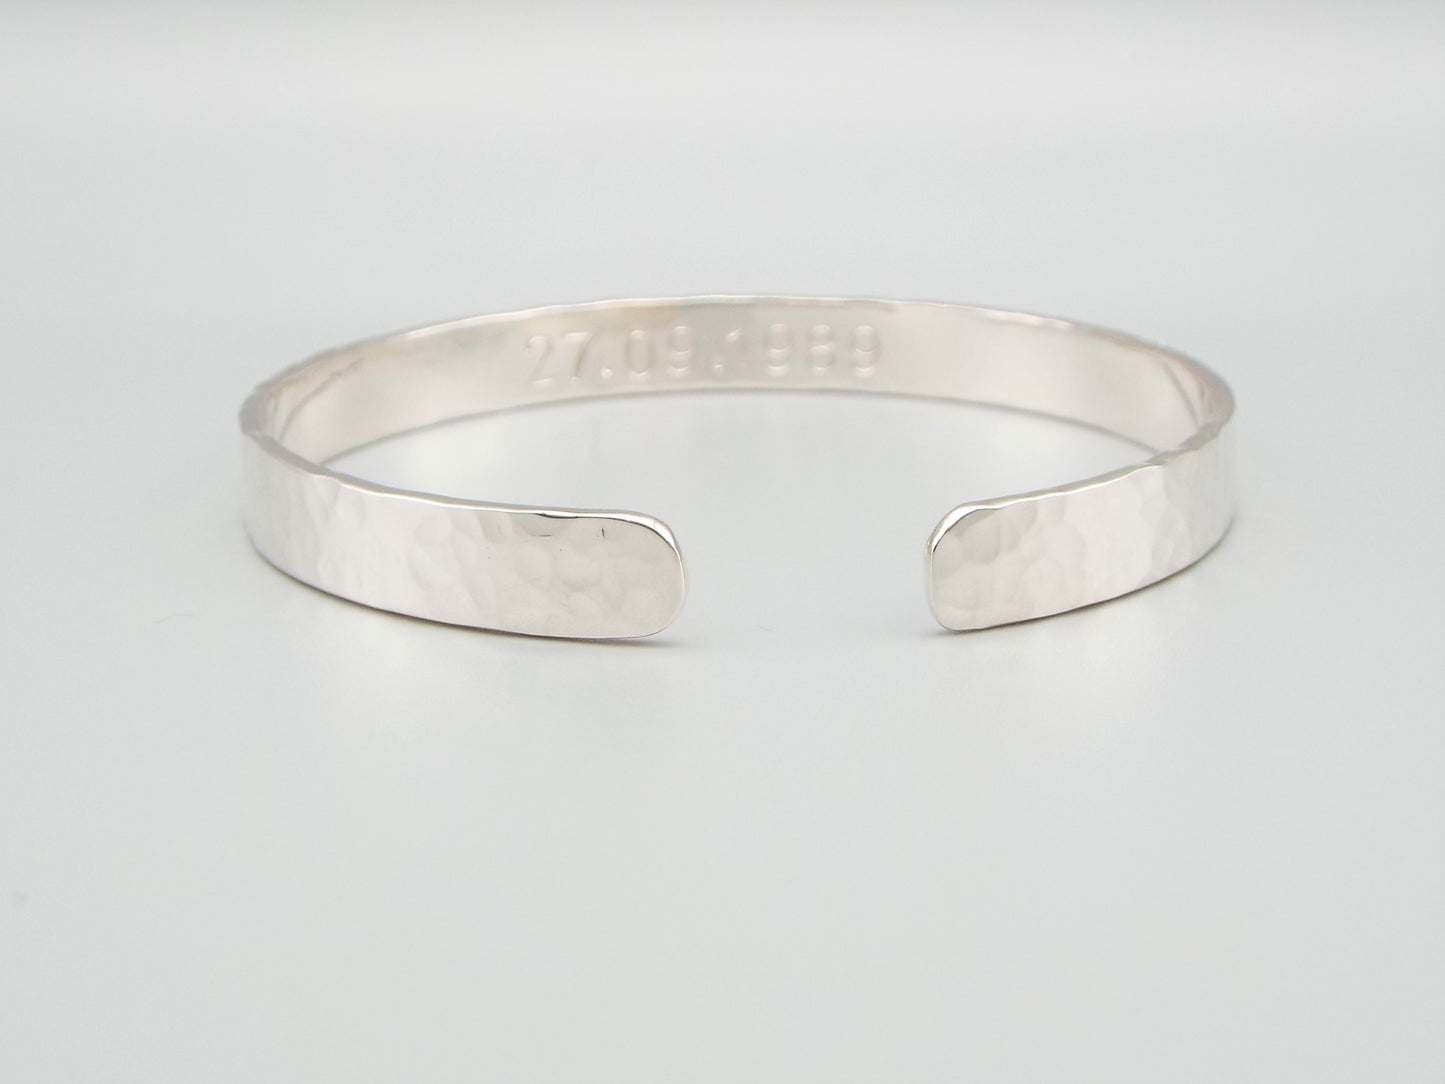 Hammered Sterling Silver Cuff Bracelet - Personalised